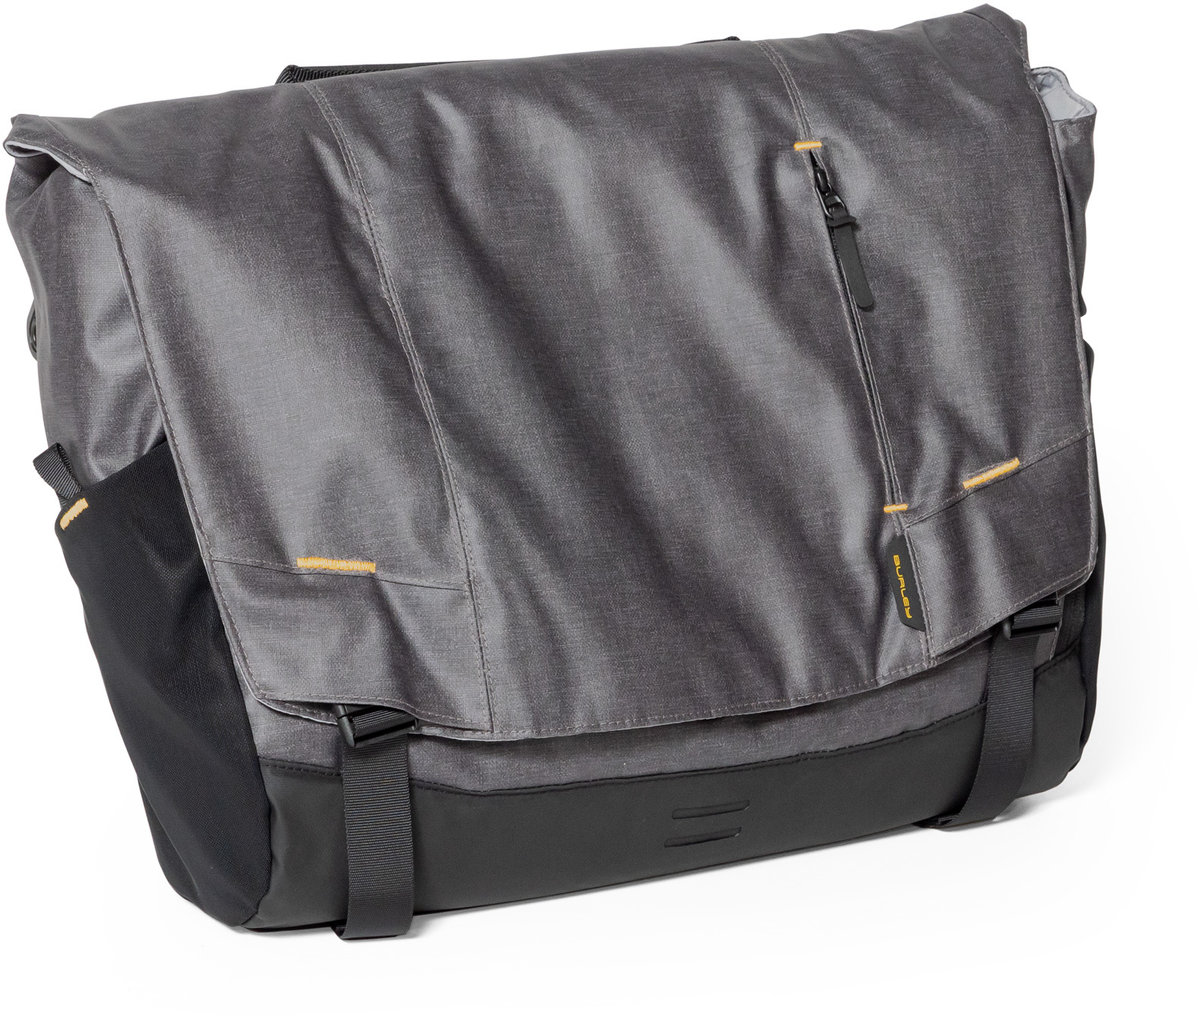 Timbuk 2 messenger bag - clothing & accessories - by owner